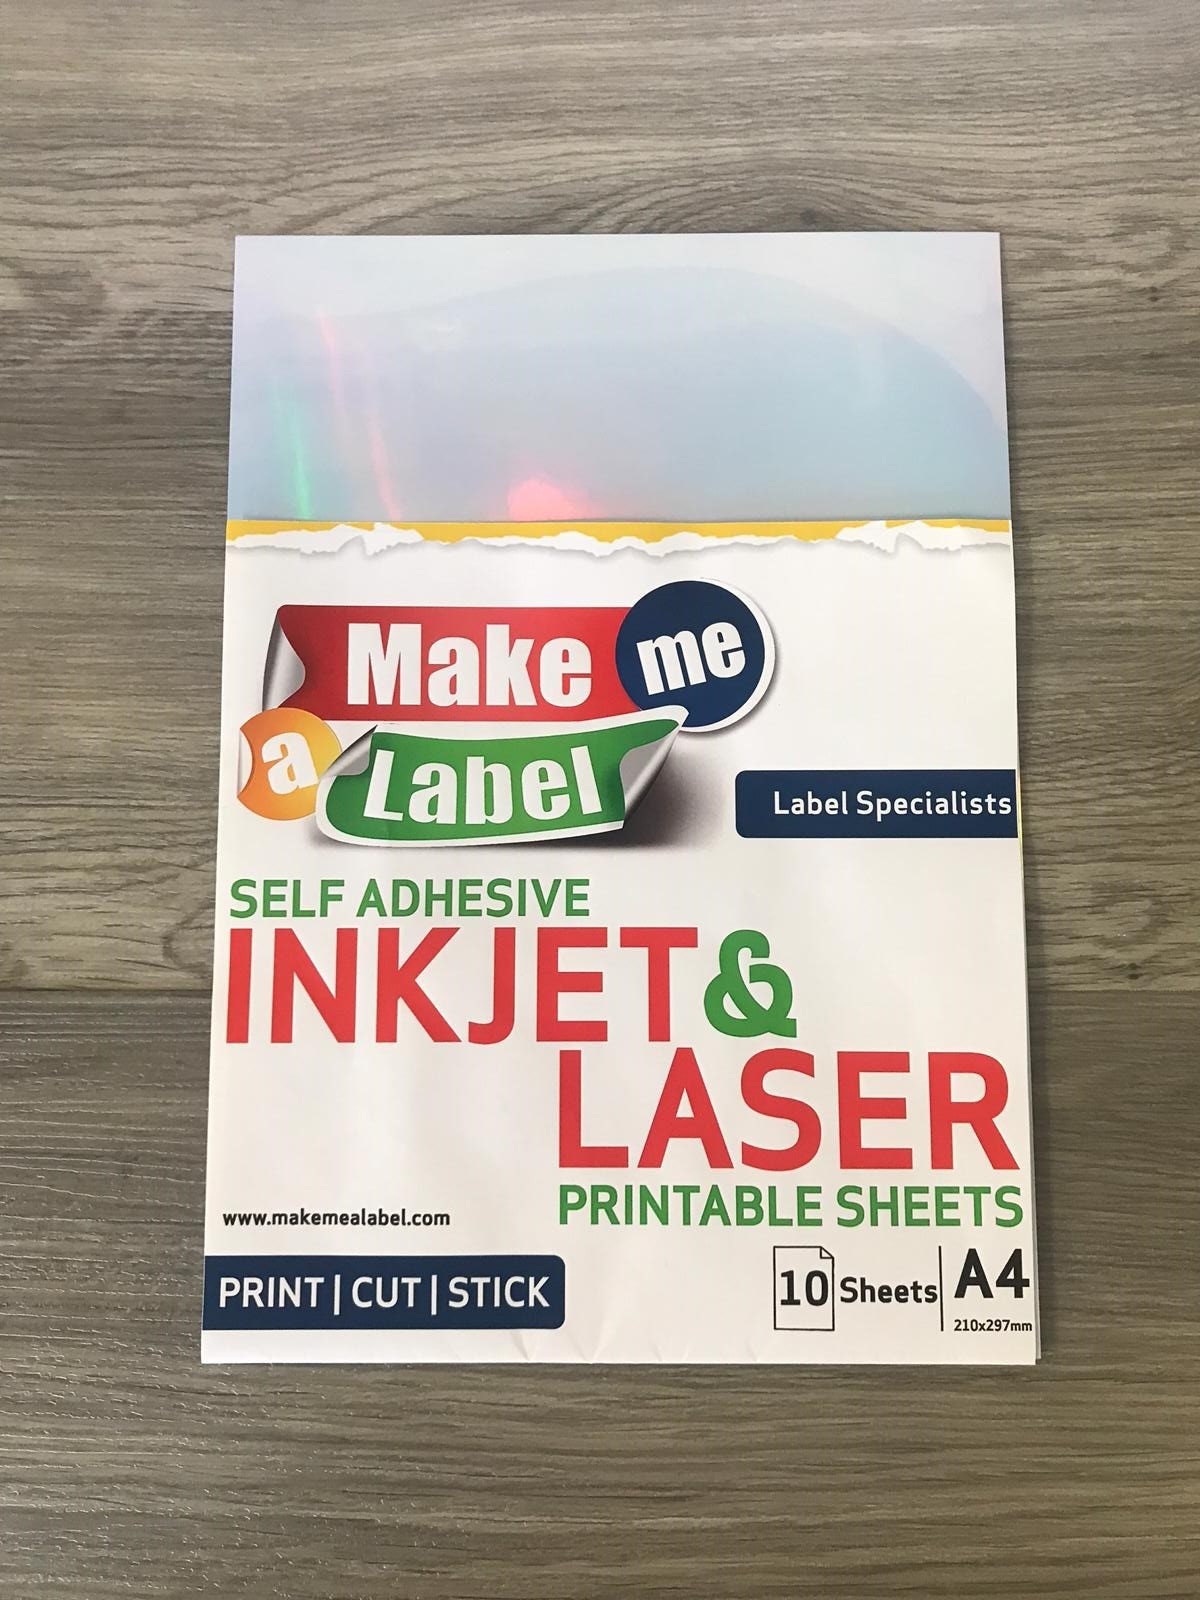 Matildas Own Inkjet Printable Fabric A4 5 Sheets 210x297mm - Old